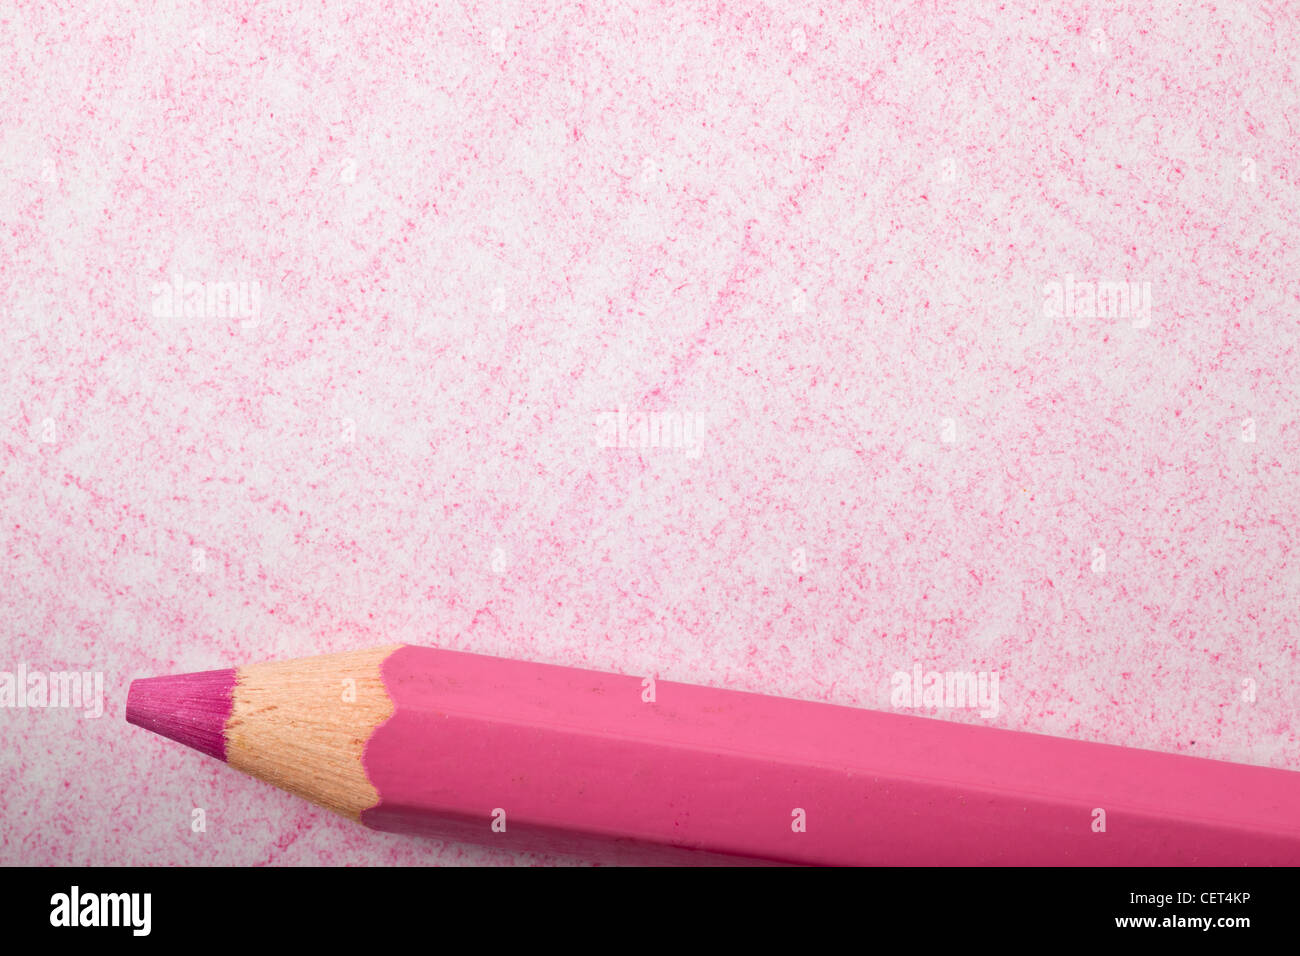 Pink color pencil with pink shading background Stock Photo